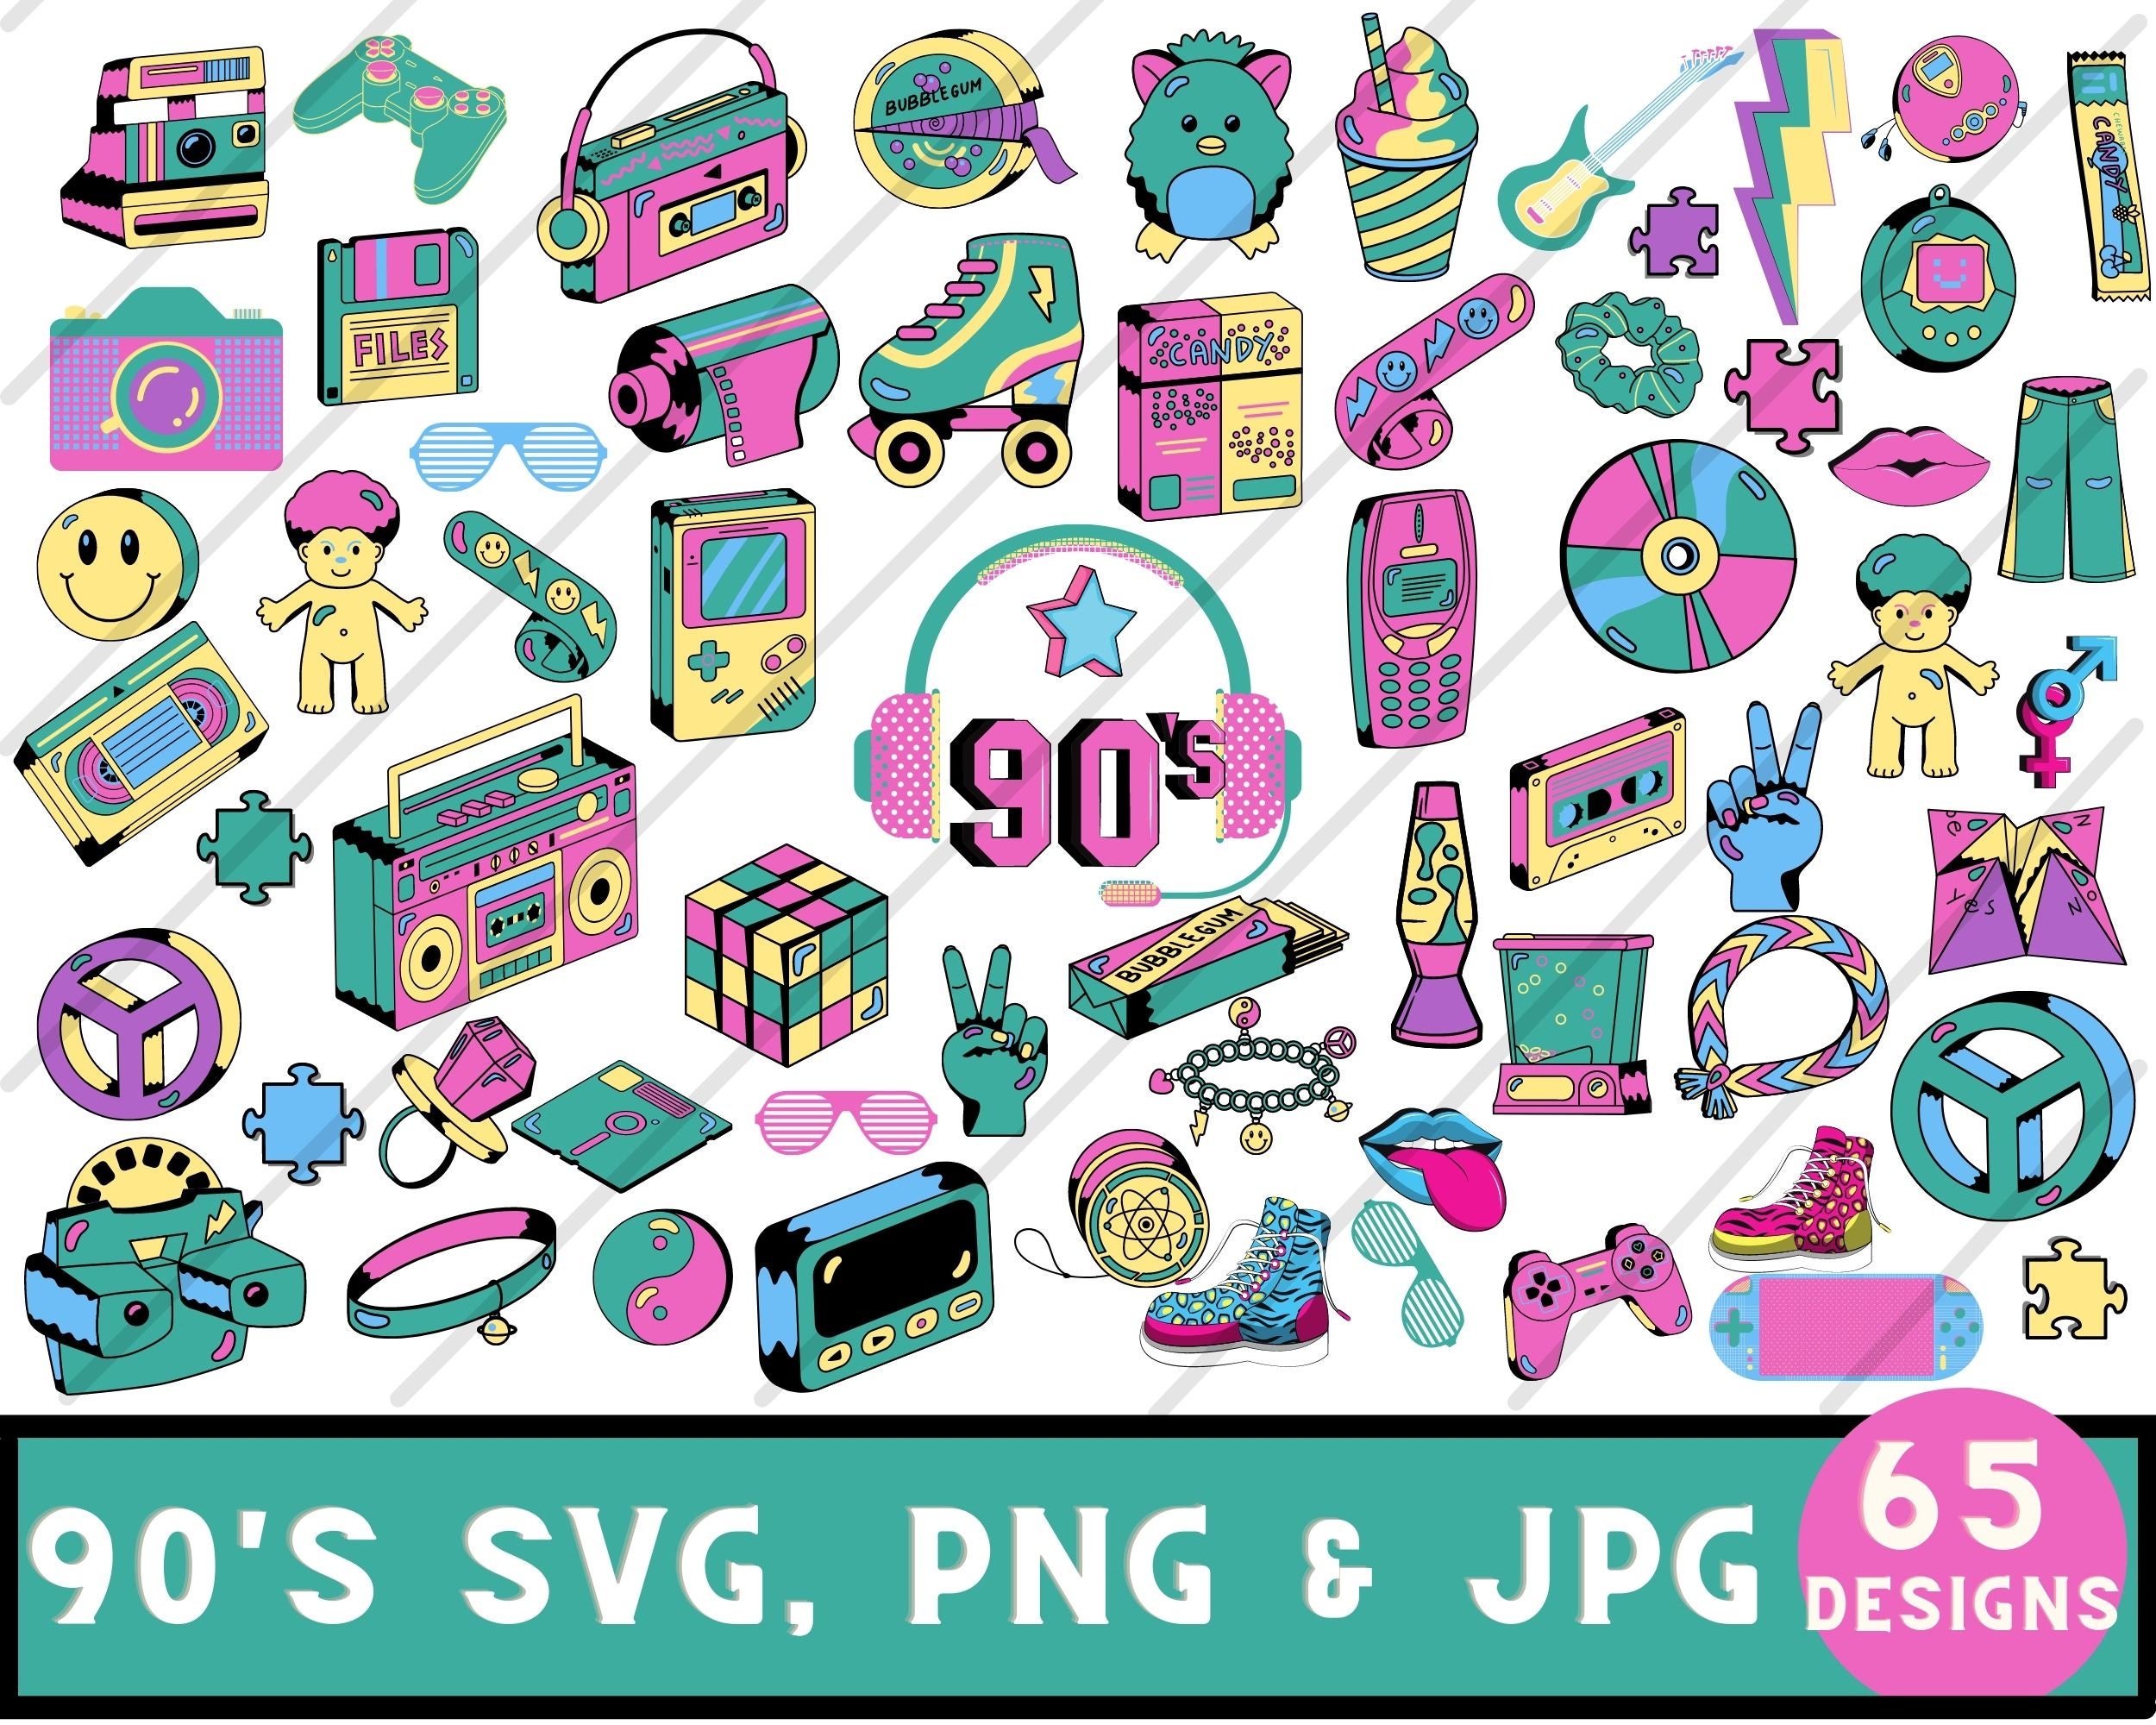 90's Clipart / 90s Retro / 90s sticker pack / 90s SVG, PNG and JPG